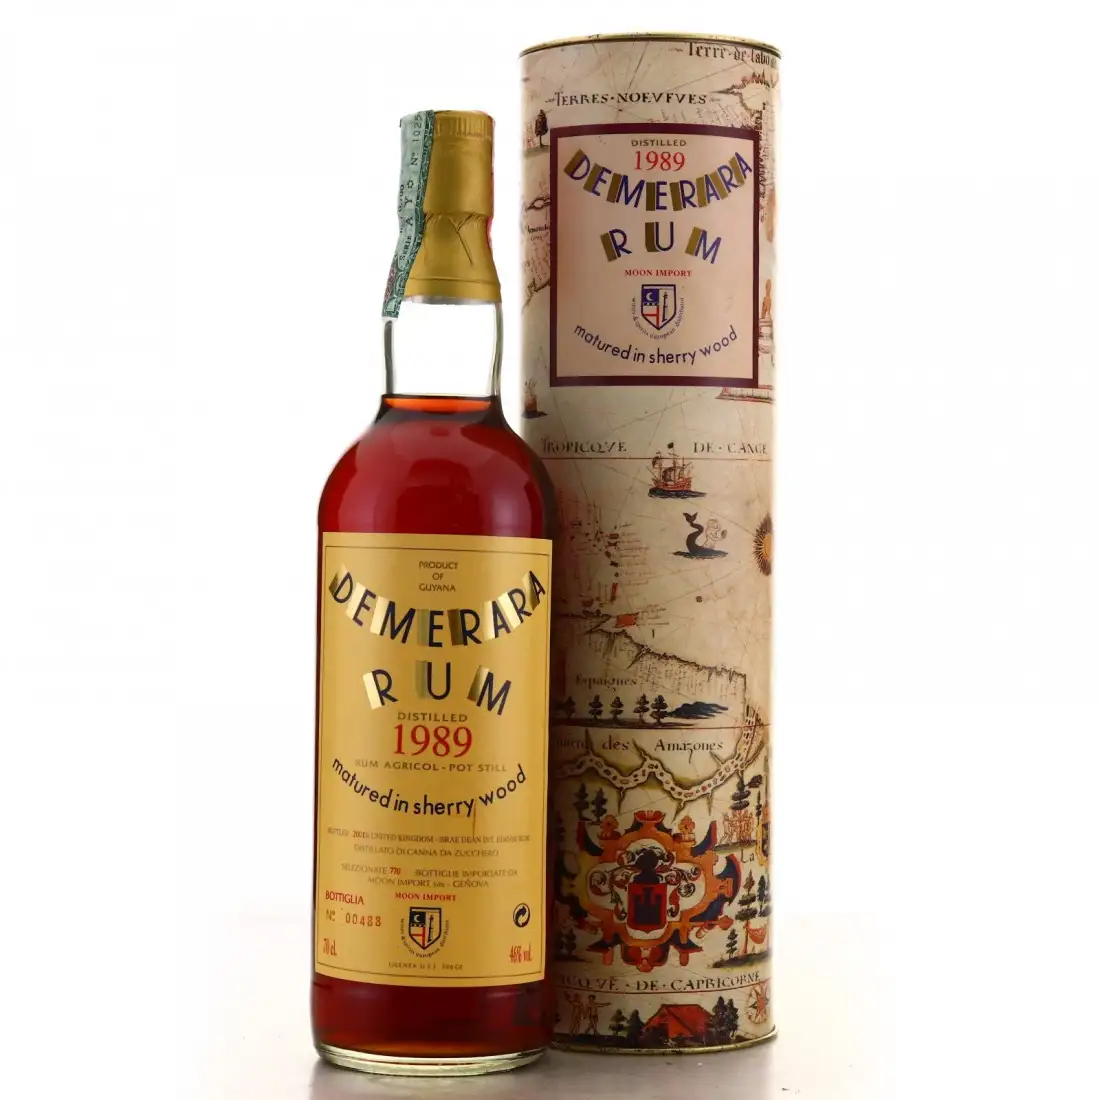 Image of the front of the bottle of the rum Demerara Rum matured in sherry wood